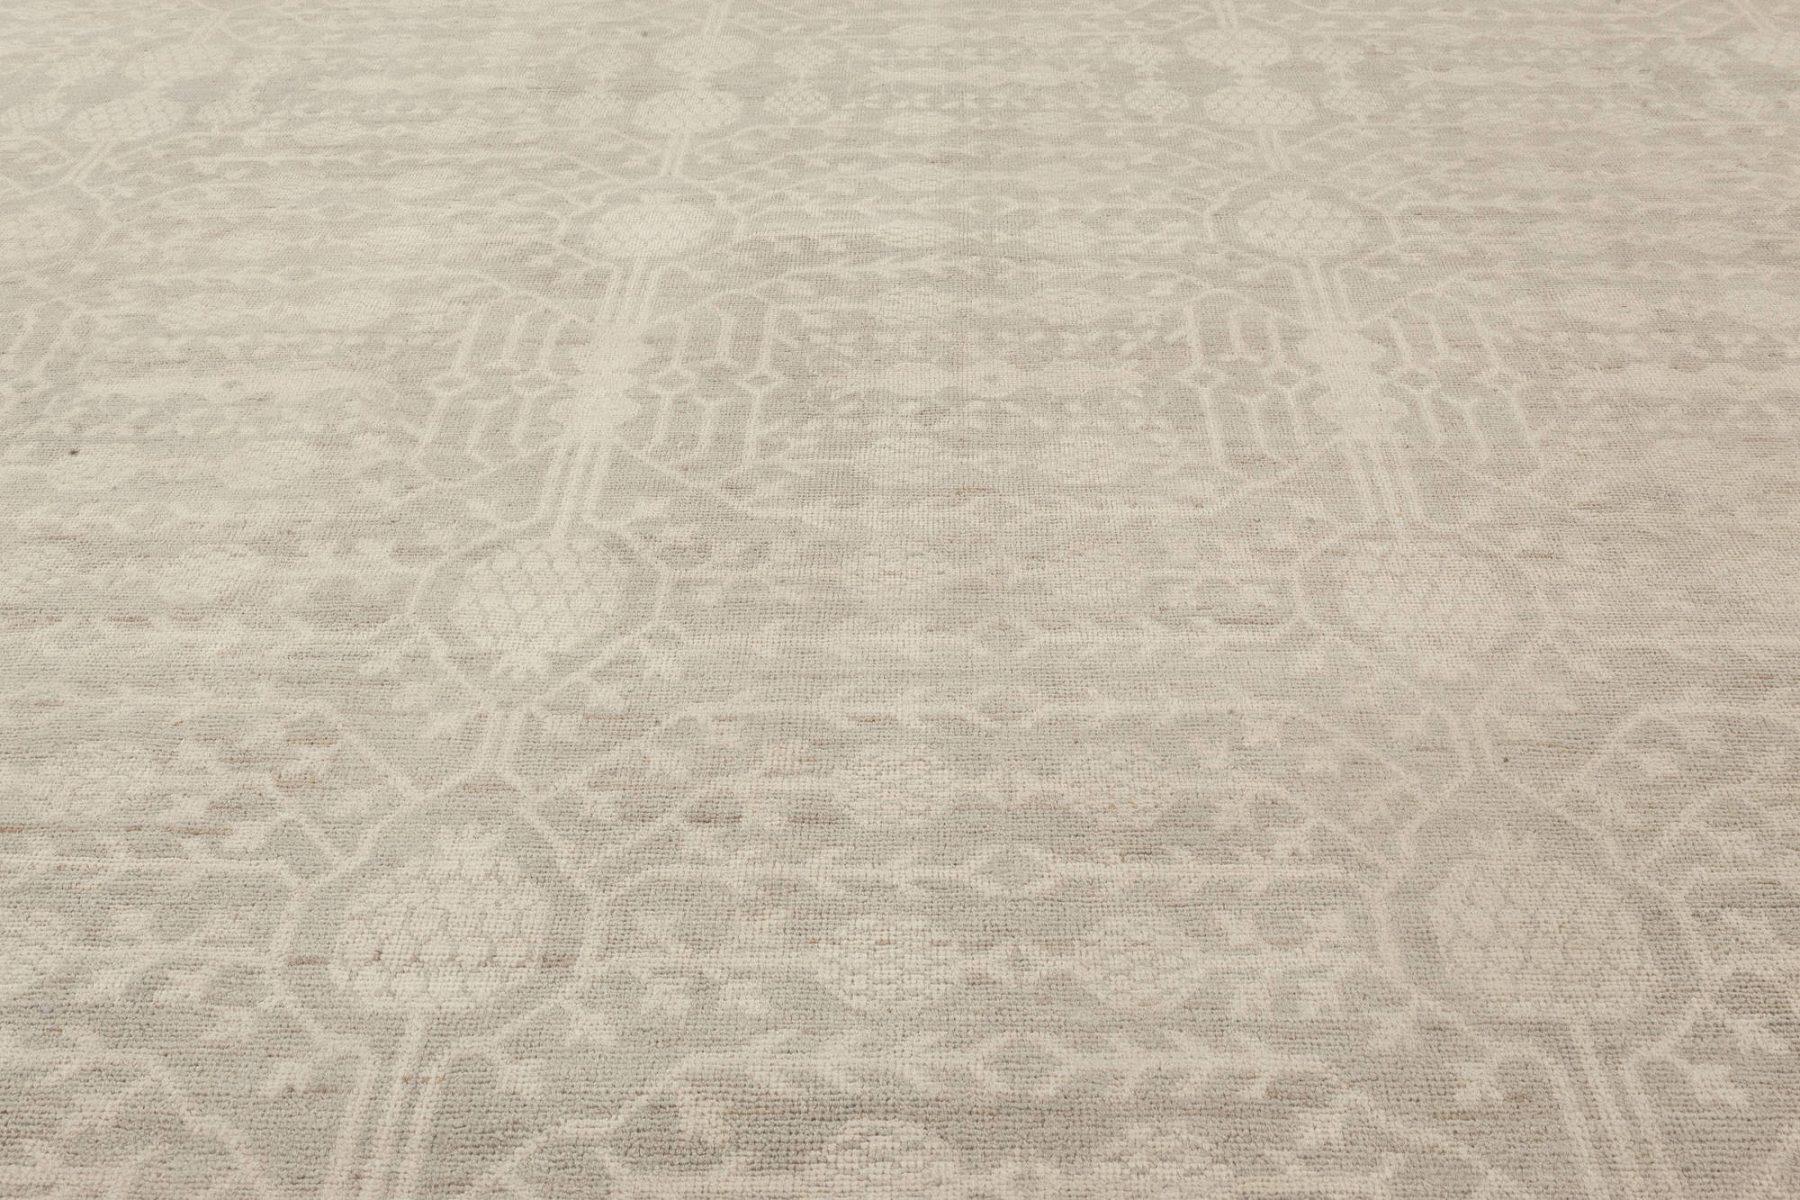 Hand-Knotted Contemporary Grey and Beige Samarkand Style Rug by Doris Leslie Blau For Sale